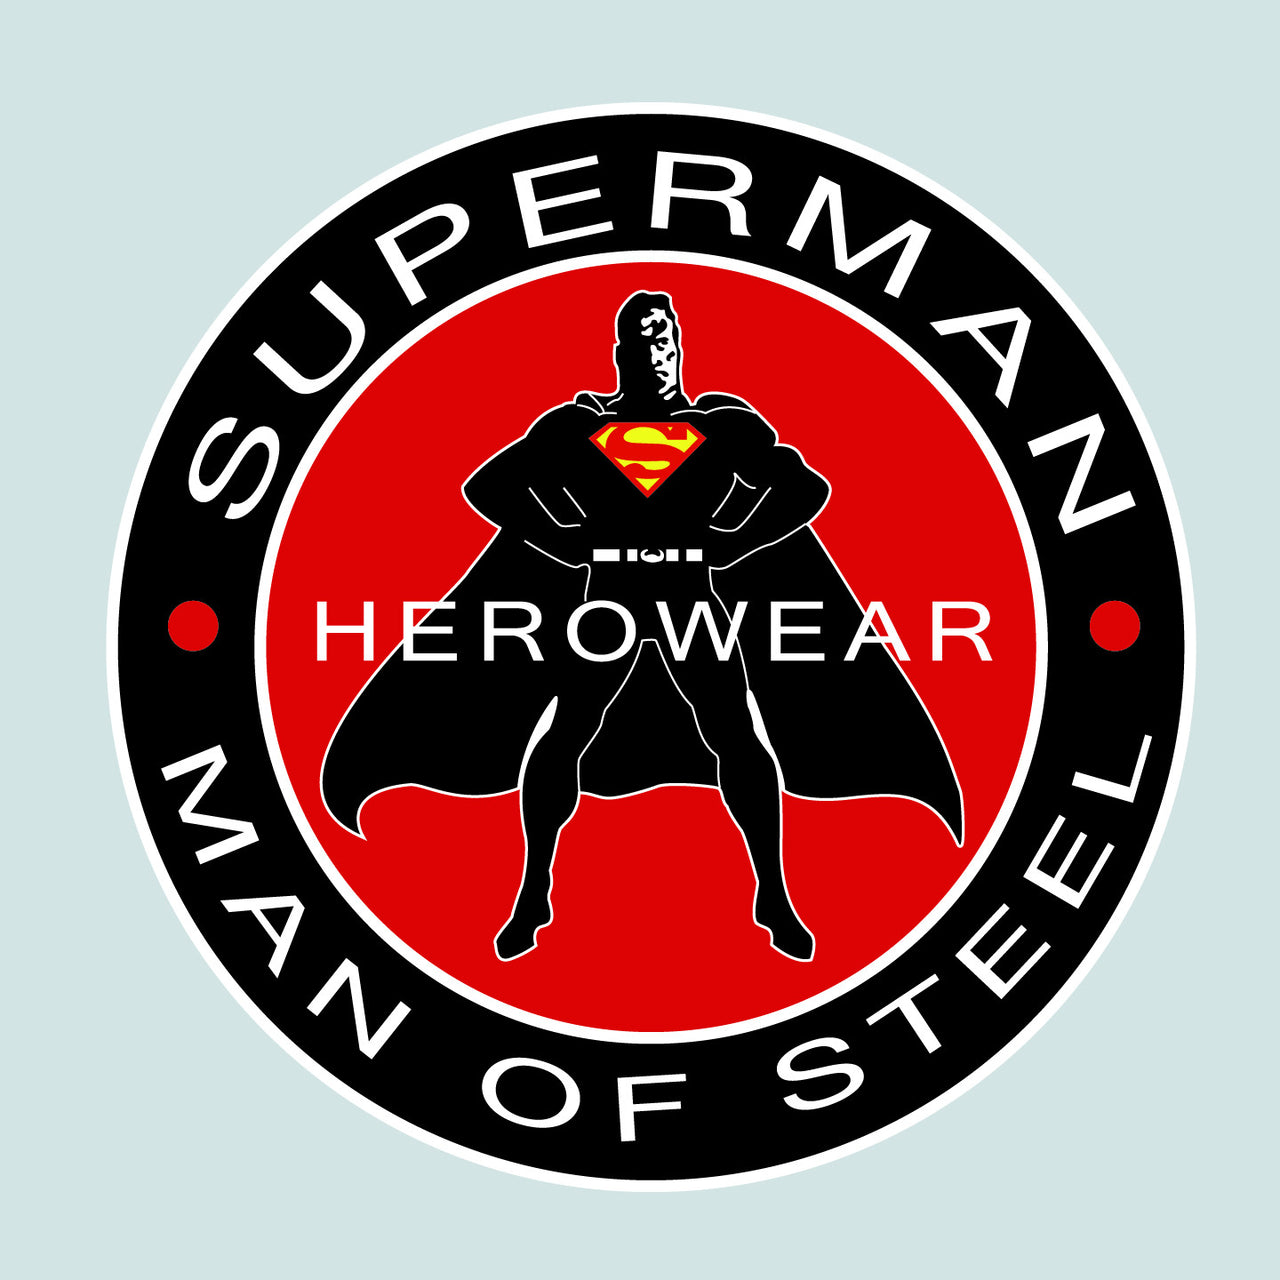 Superman Herowear Round Logo on Ash Gray Fitted Sheer Tank Top for Women - TshirtNow.net - 2